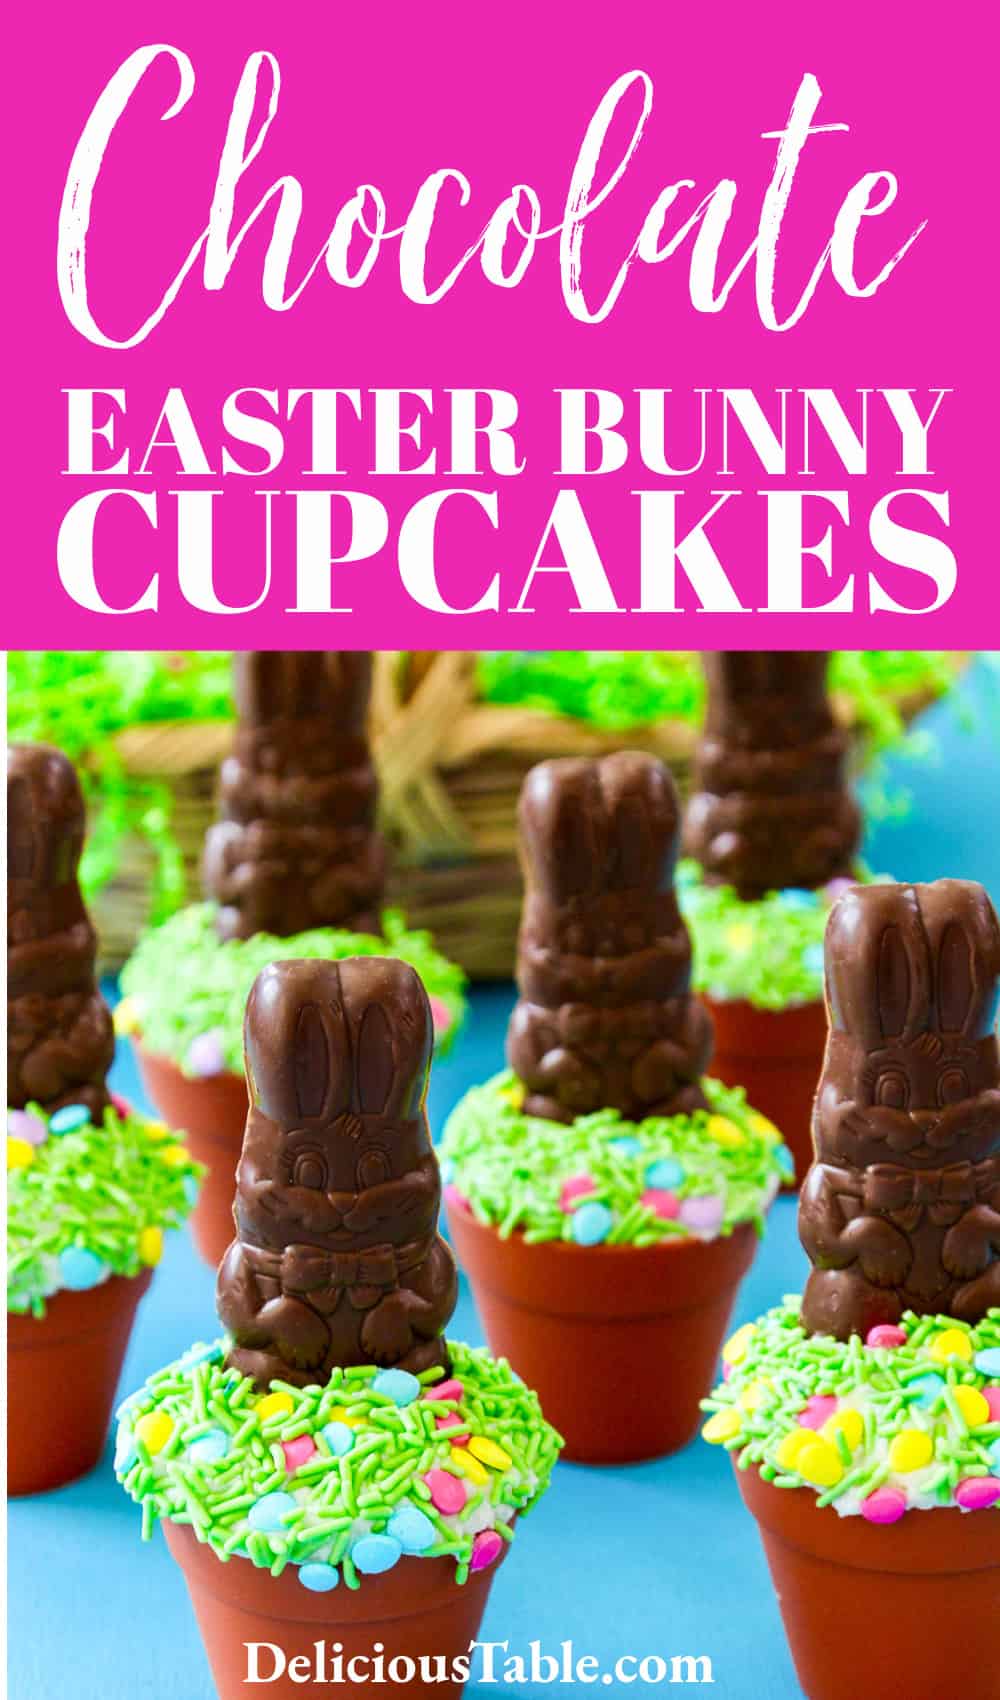 Easy Chocolate Easter Bunny Cupcakes | Delicious Table